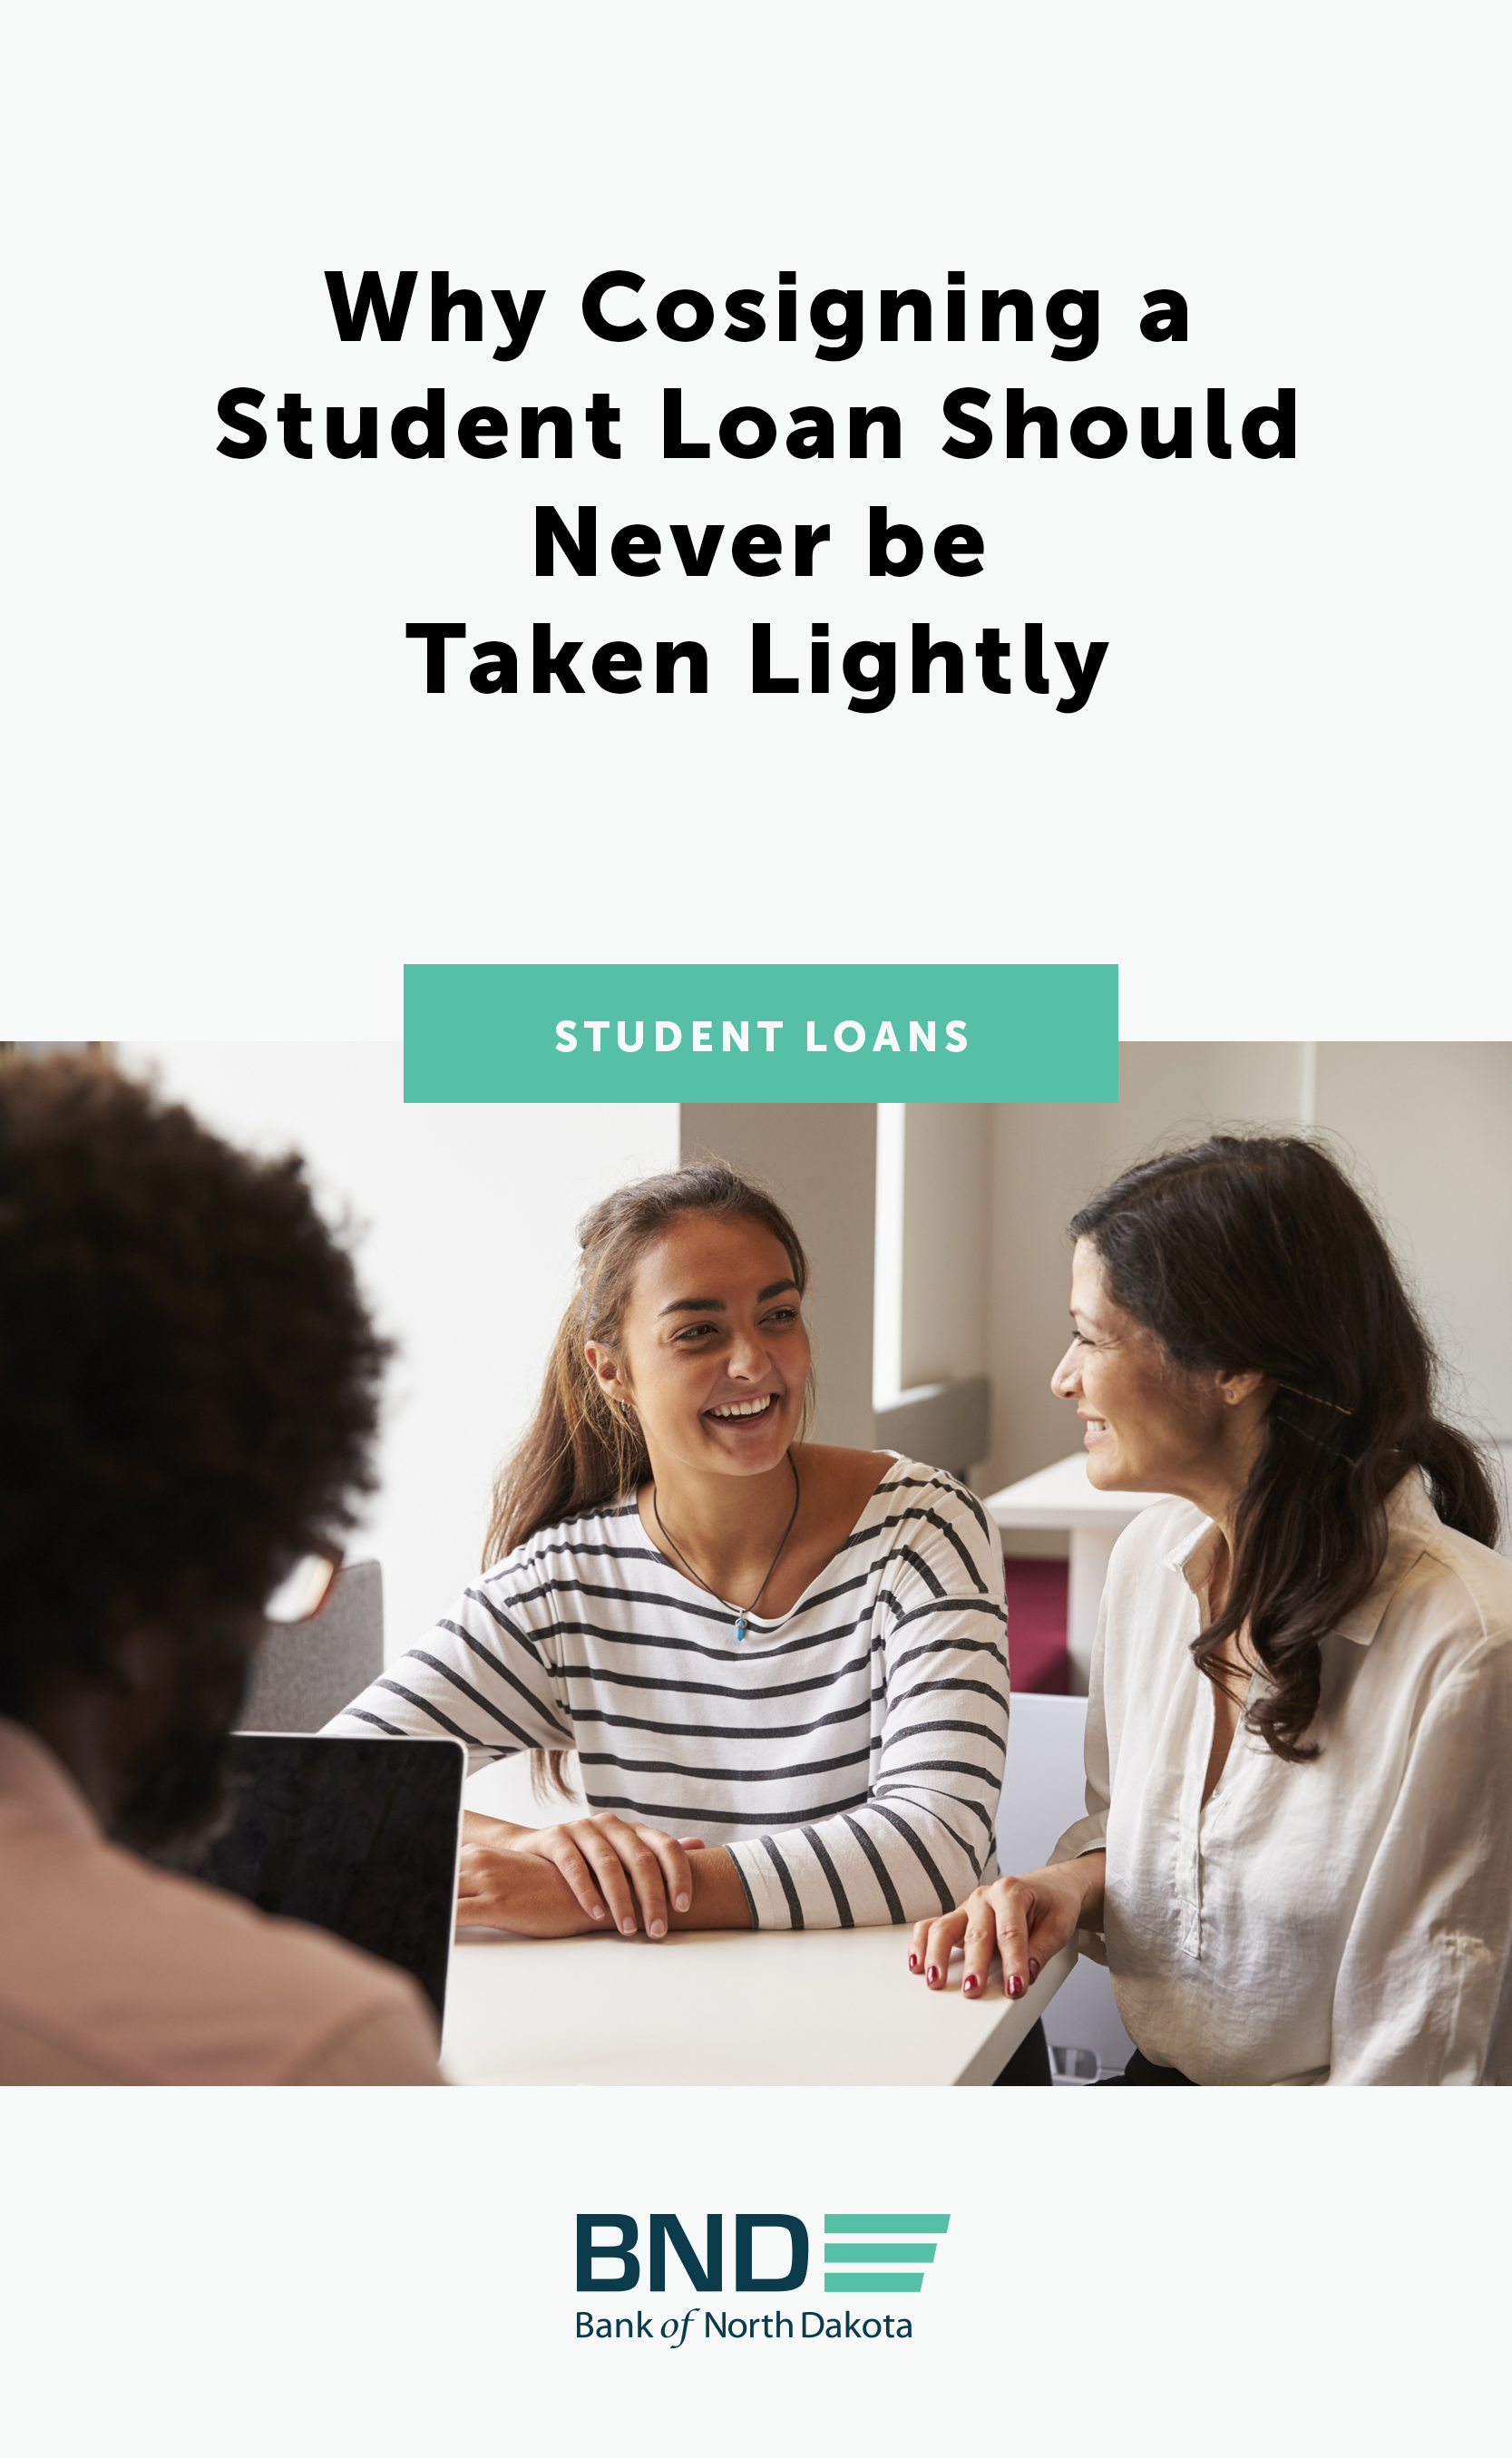 Why-Cosign-a-Student-Loan